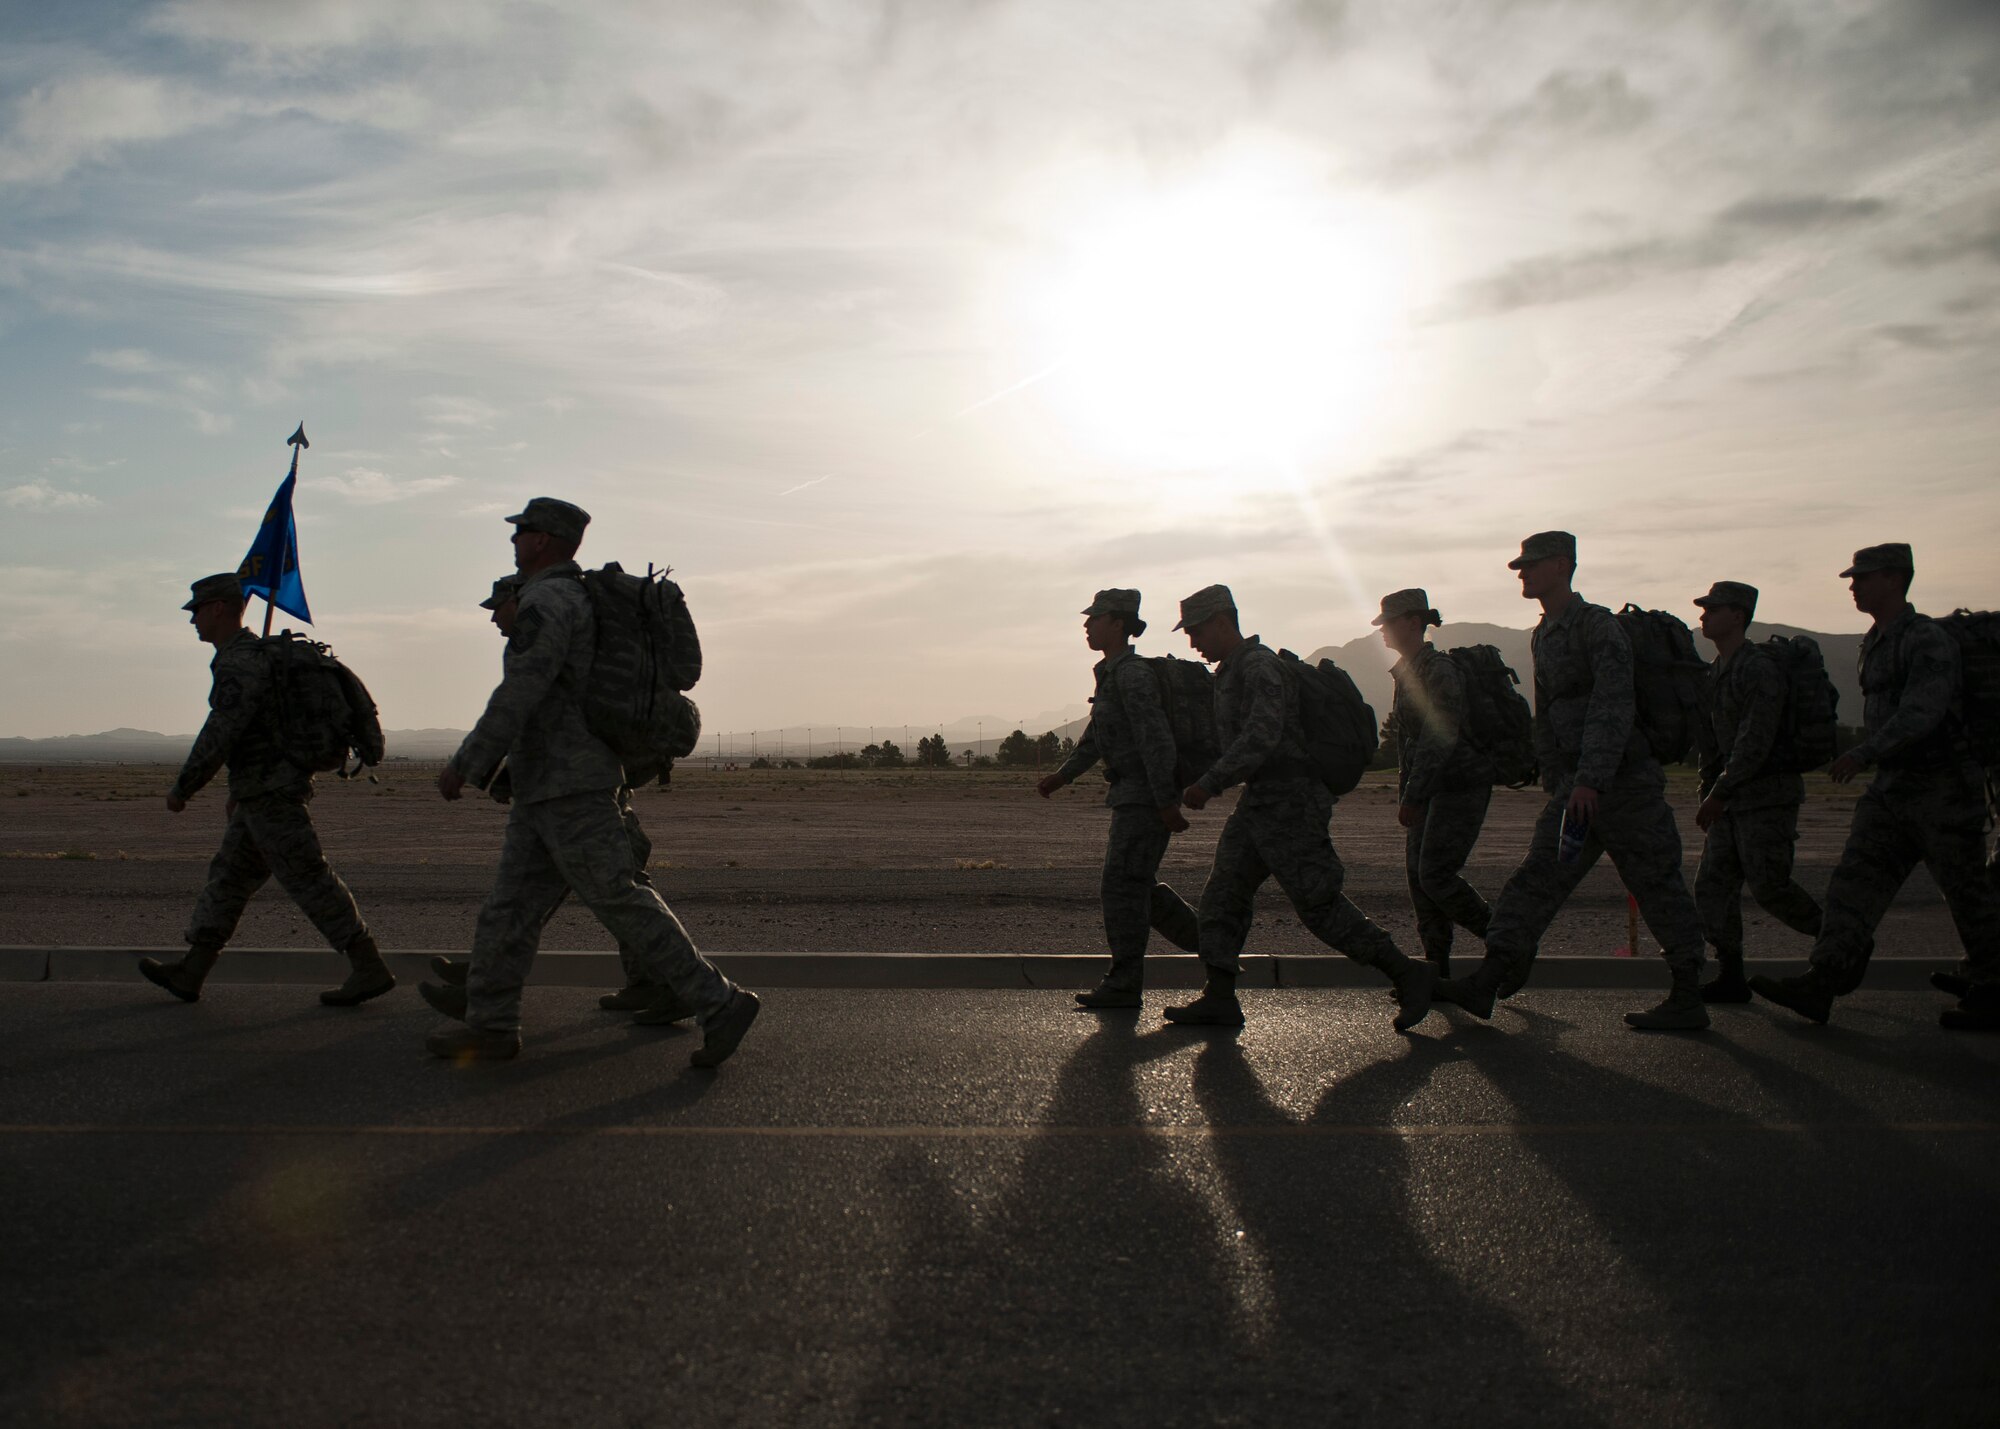 Airmen assigned to the 99th Security Forces Squadron participate in a 10K memorial ruck march for National Police Week at Nellis Air Force Base, Nev., May 13, 2015. The march was one of many events held at Nellis AFB to honor the sacrifices of both military and civilian law enforcement members. (U.S. Air Force photo by Staff Sgt. Siuta B. Ika)